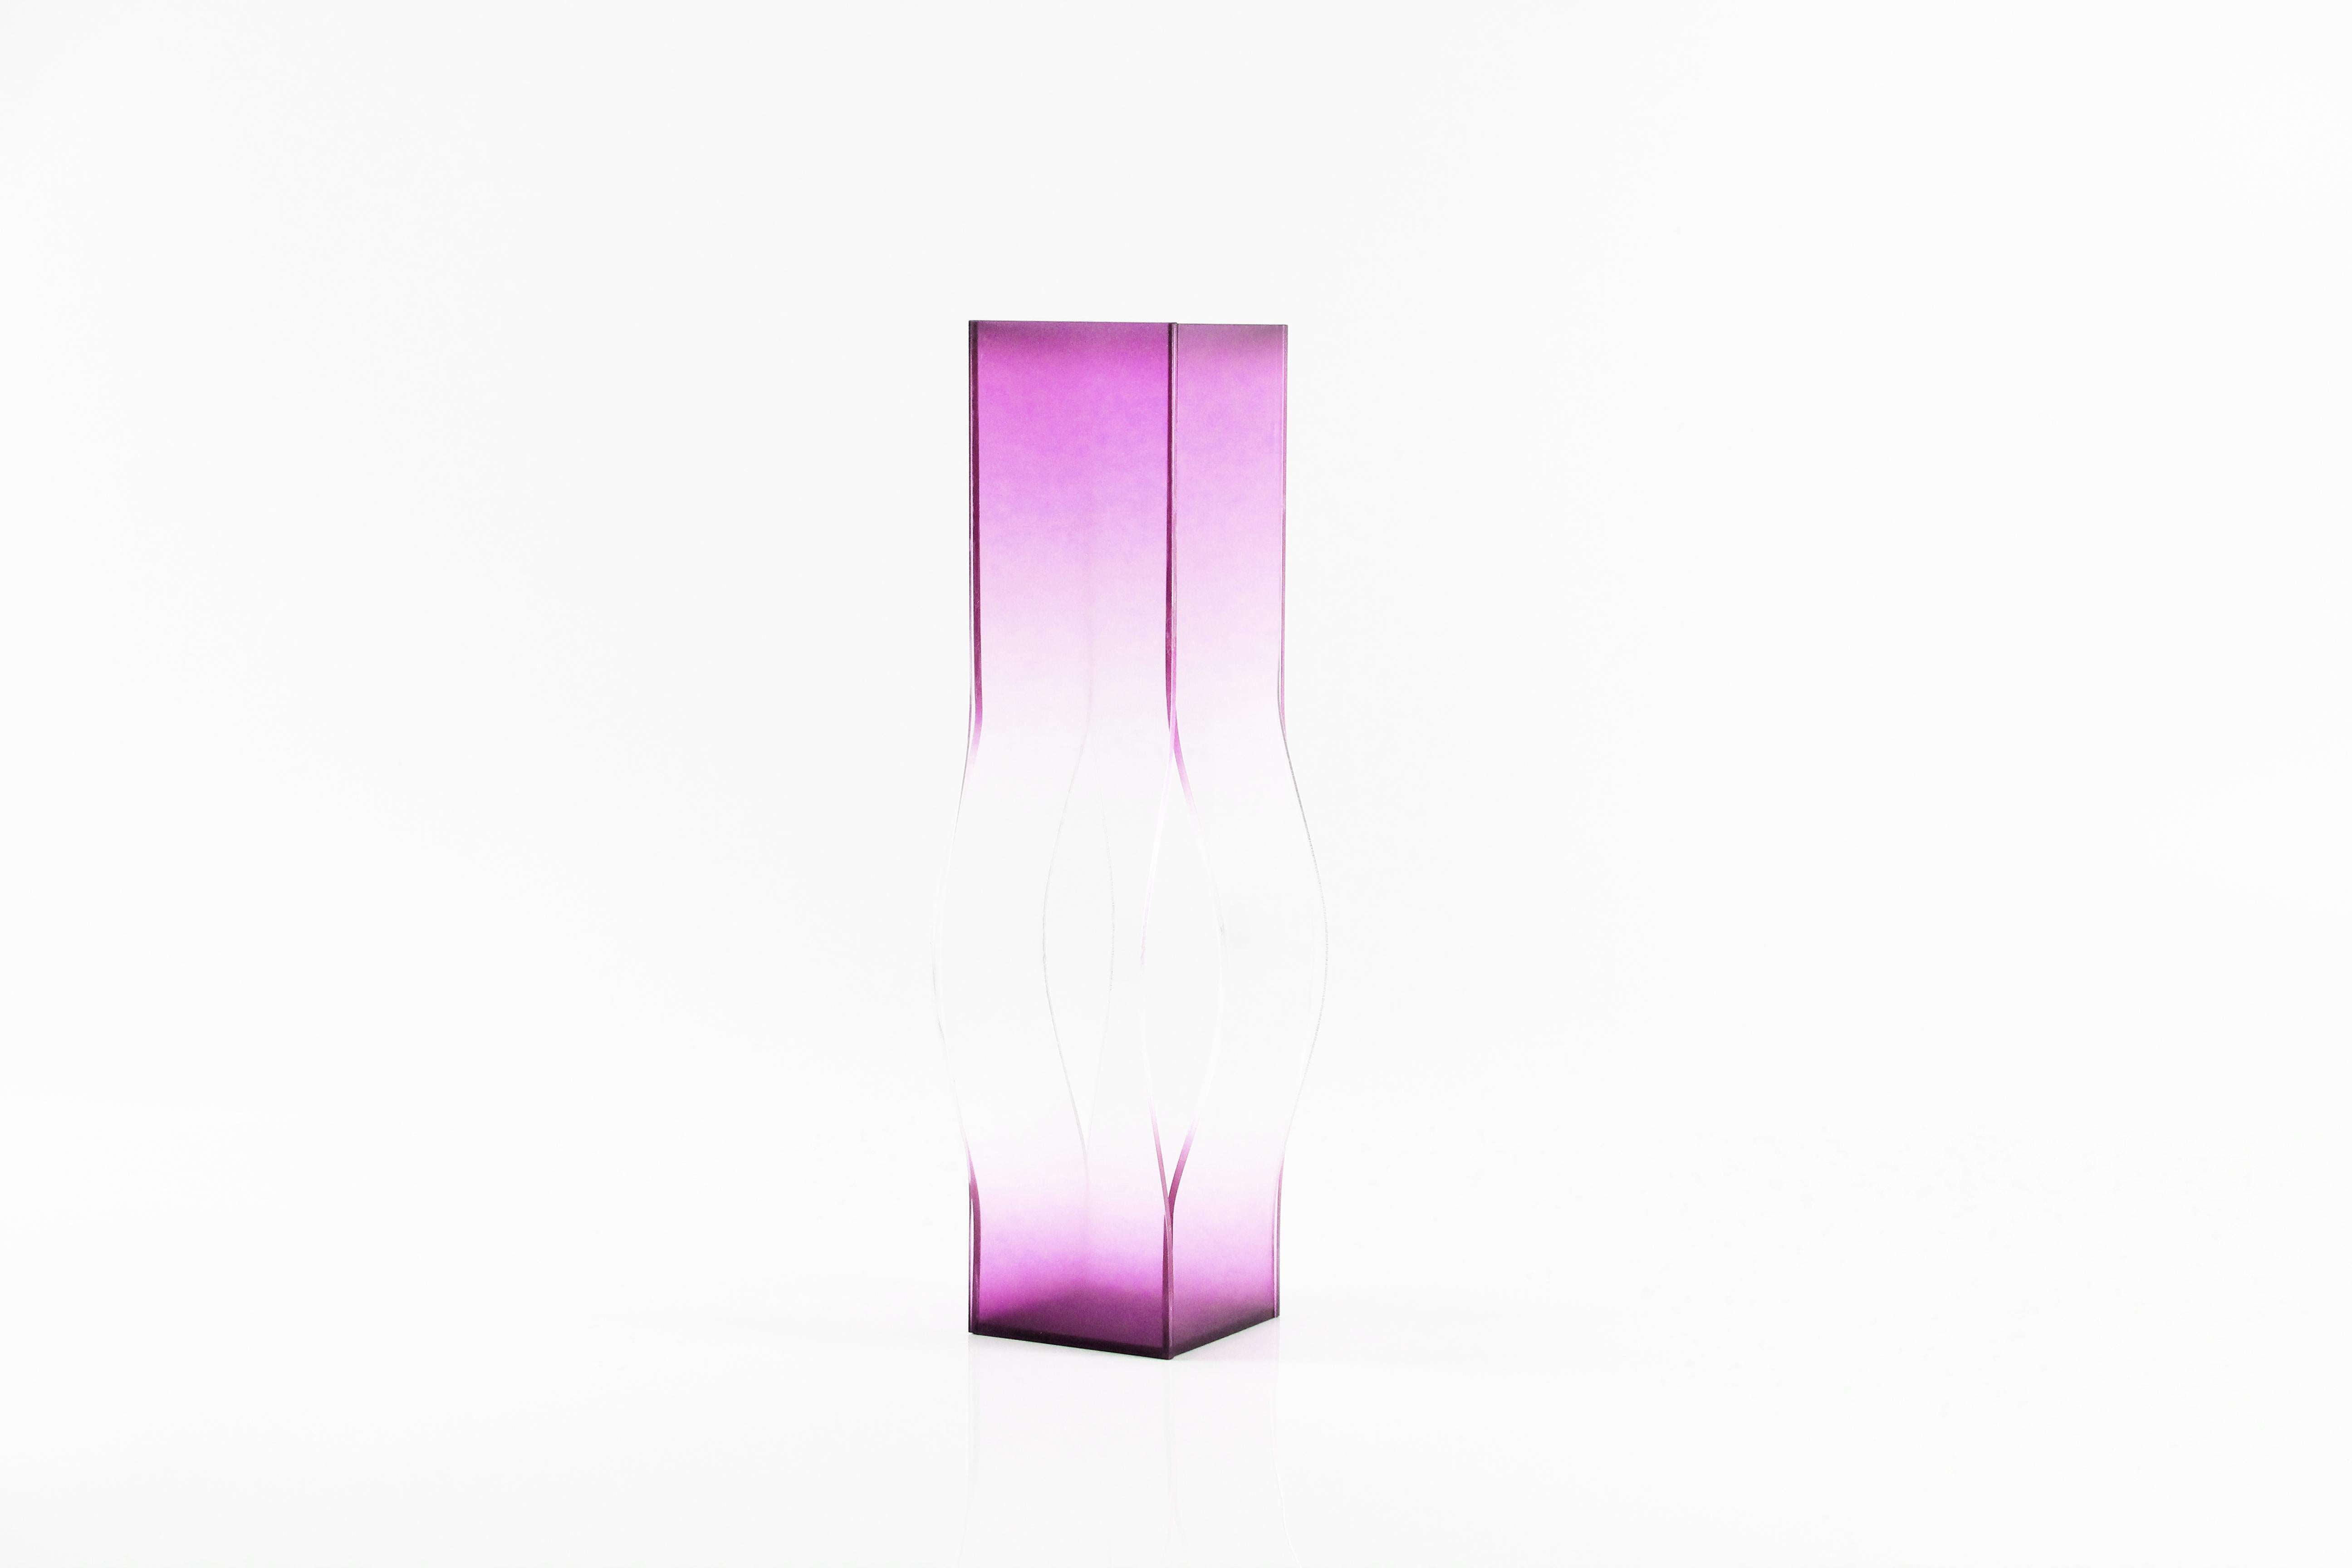 Stretch color is a set of local disappearing vases. The three -sized vases show the strength and change of the color after being stretched in the space.
Through the shape of the curve and the gradient color, the designer makes the vase display a